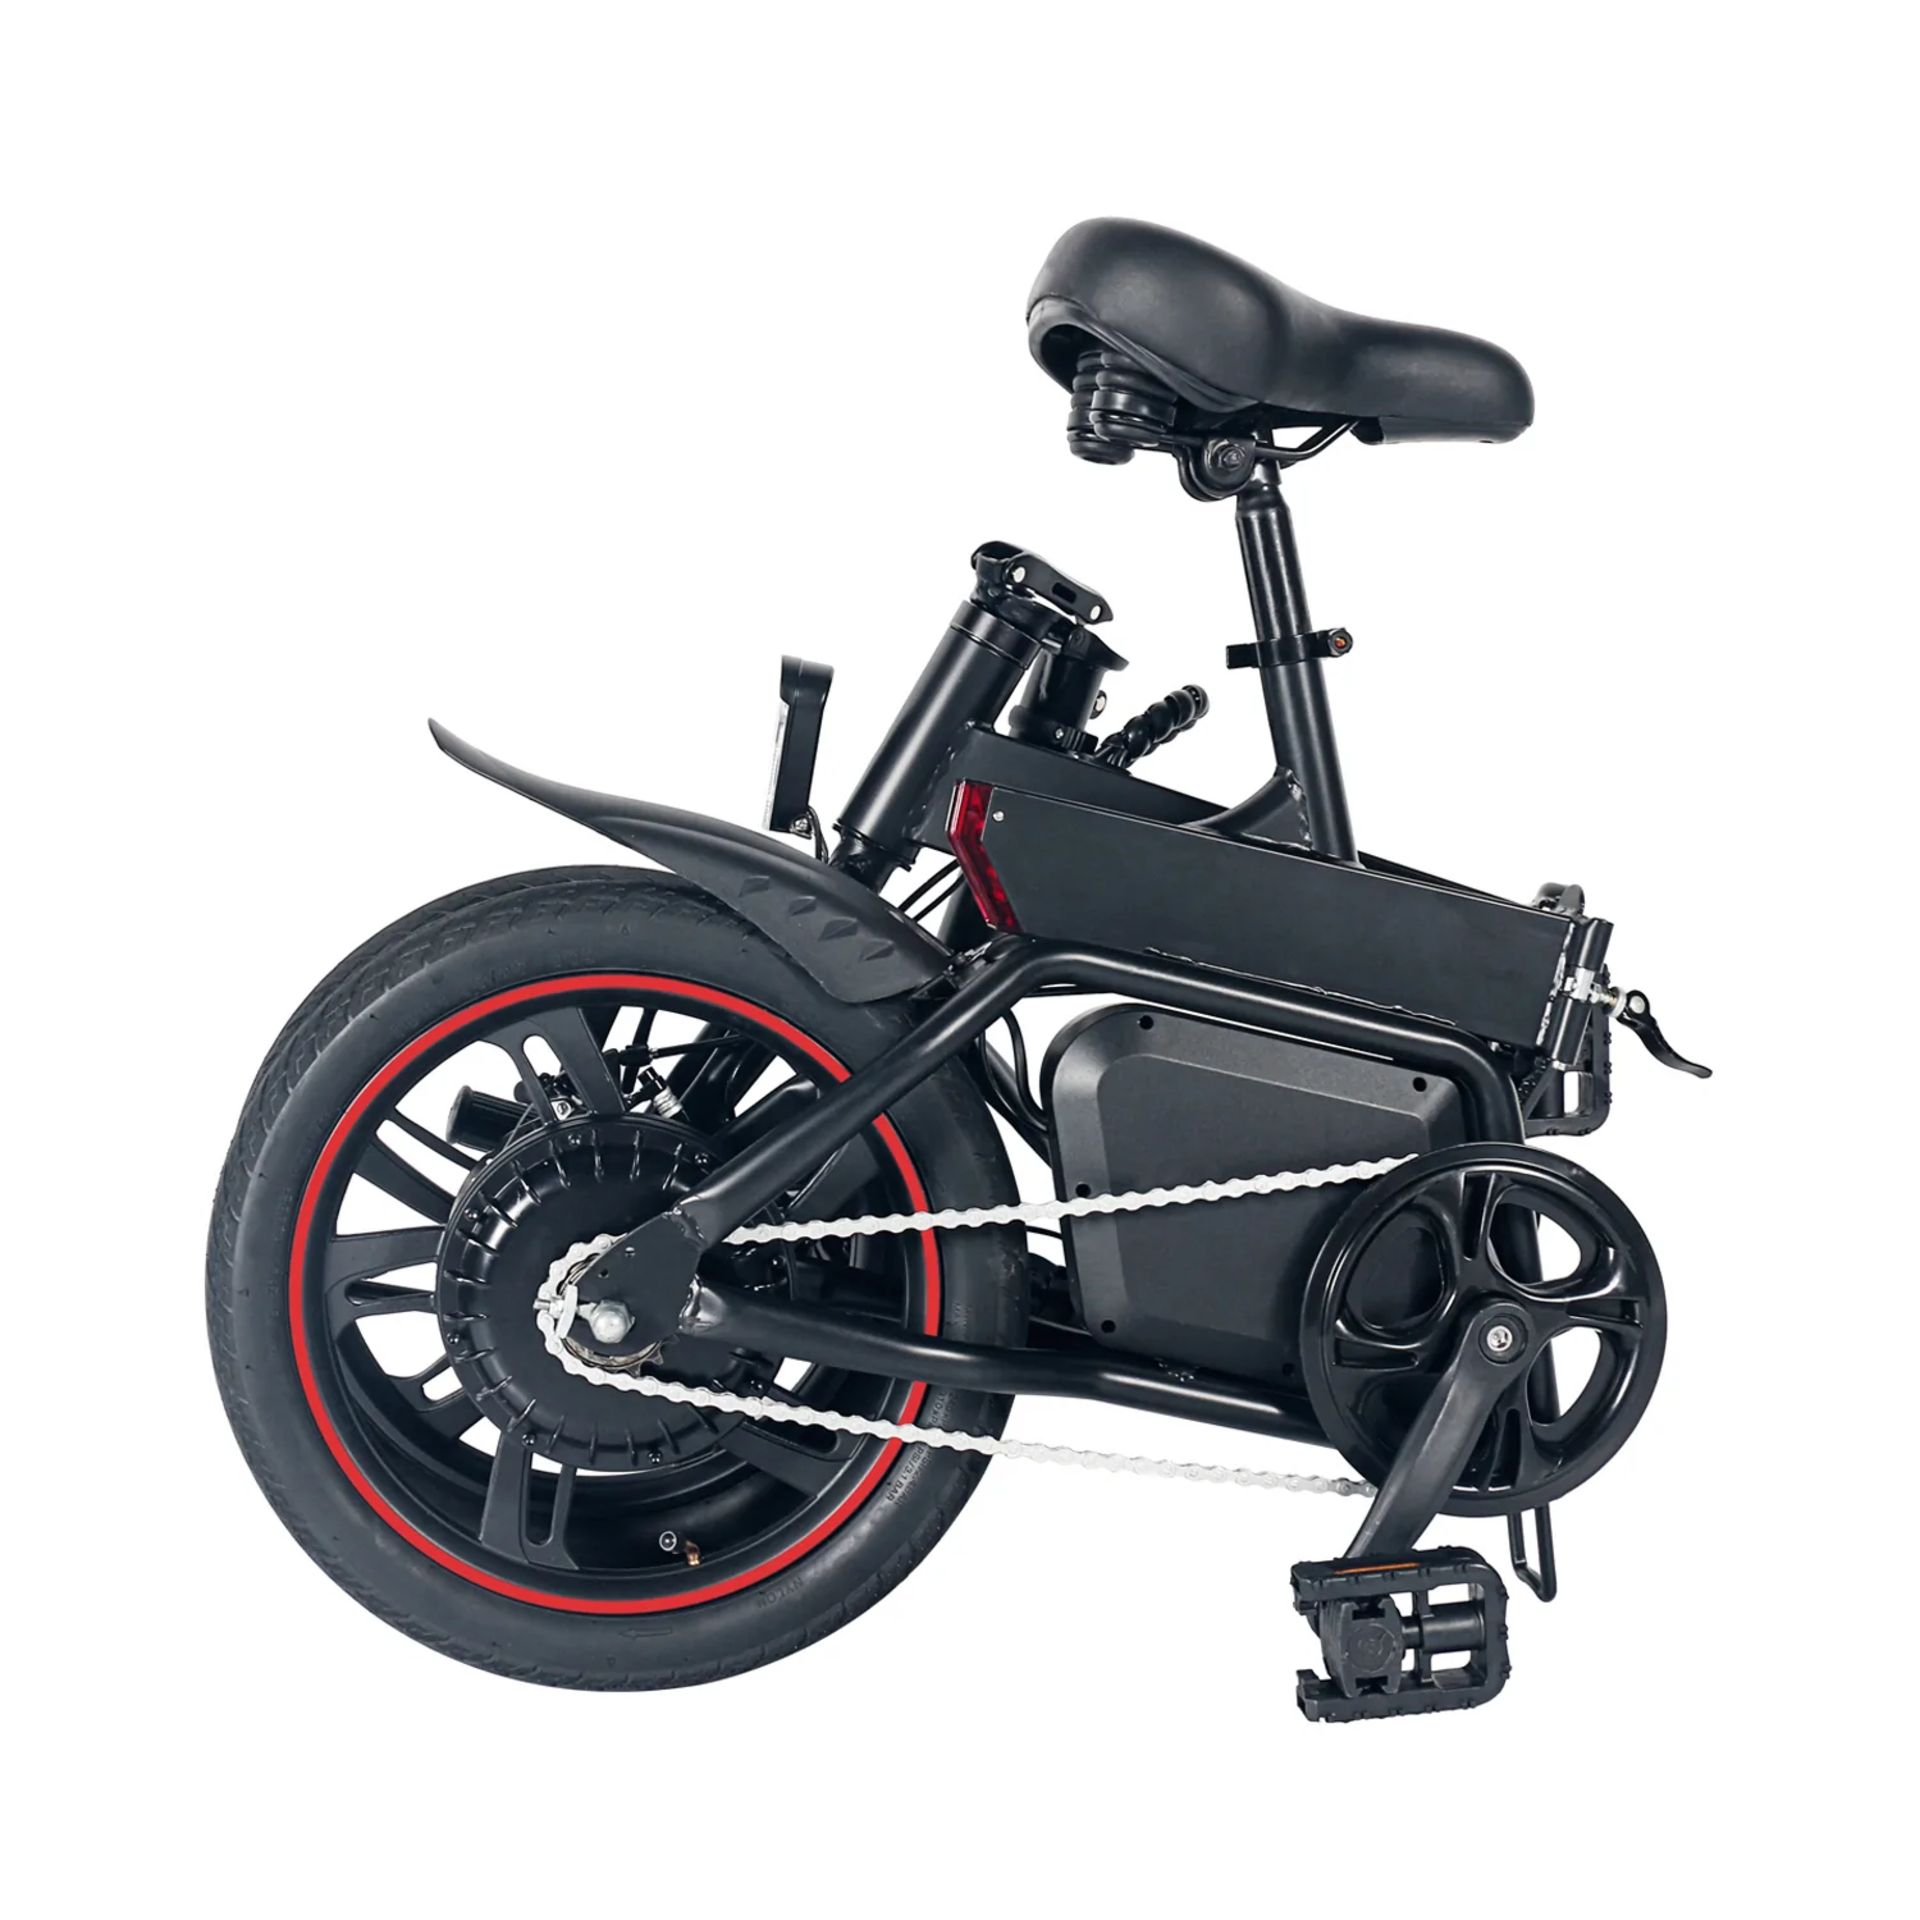 5 X Windgoo B20 Pro Electric Bike. RRP £1,100.99. With 16-inch-wide tires and a frame of upgraded - Image 2 of 7